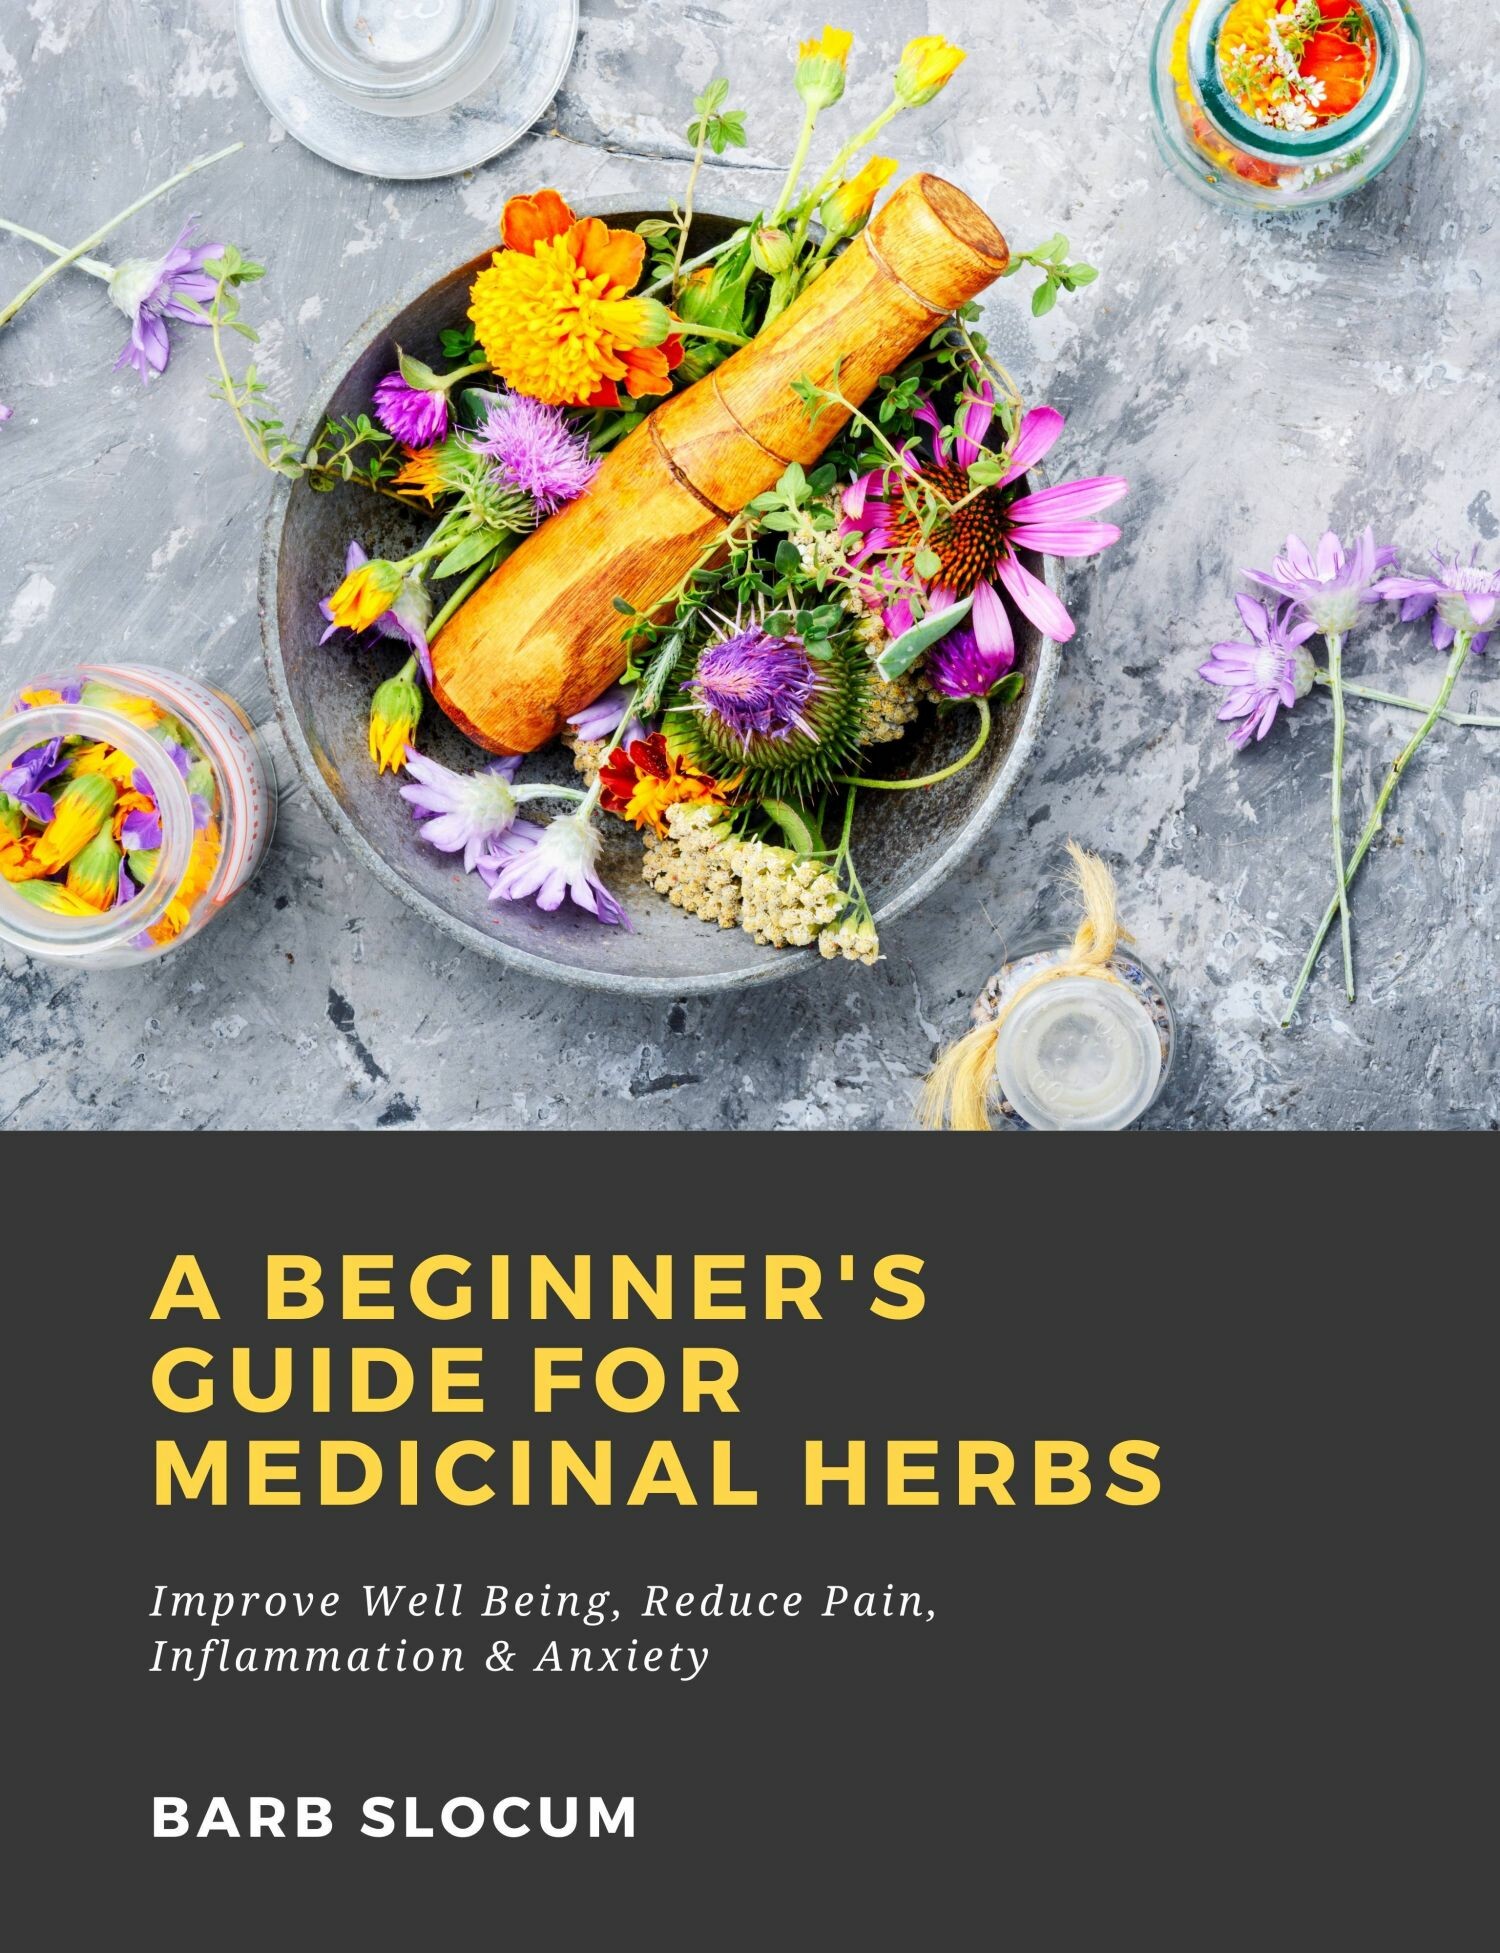 A Beginner's Guide for Medicinal Herbs: Improve Well Being, Reduce Pain, Inflammation & Anxiety